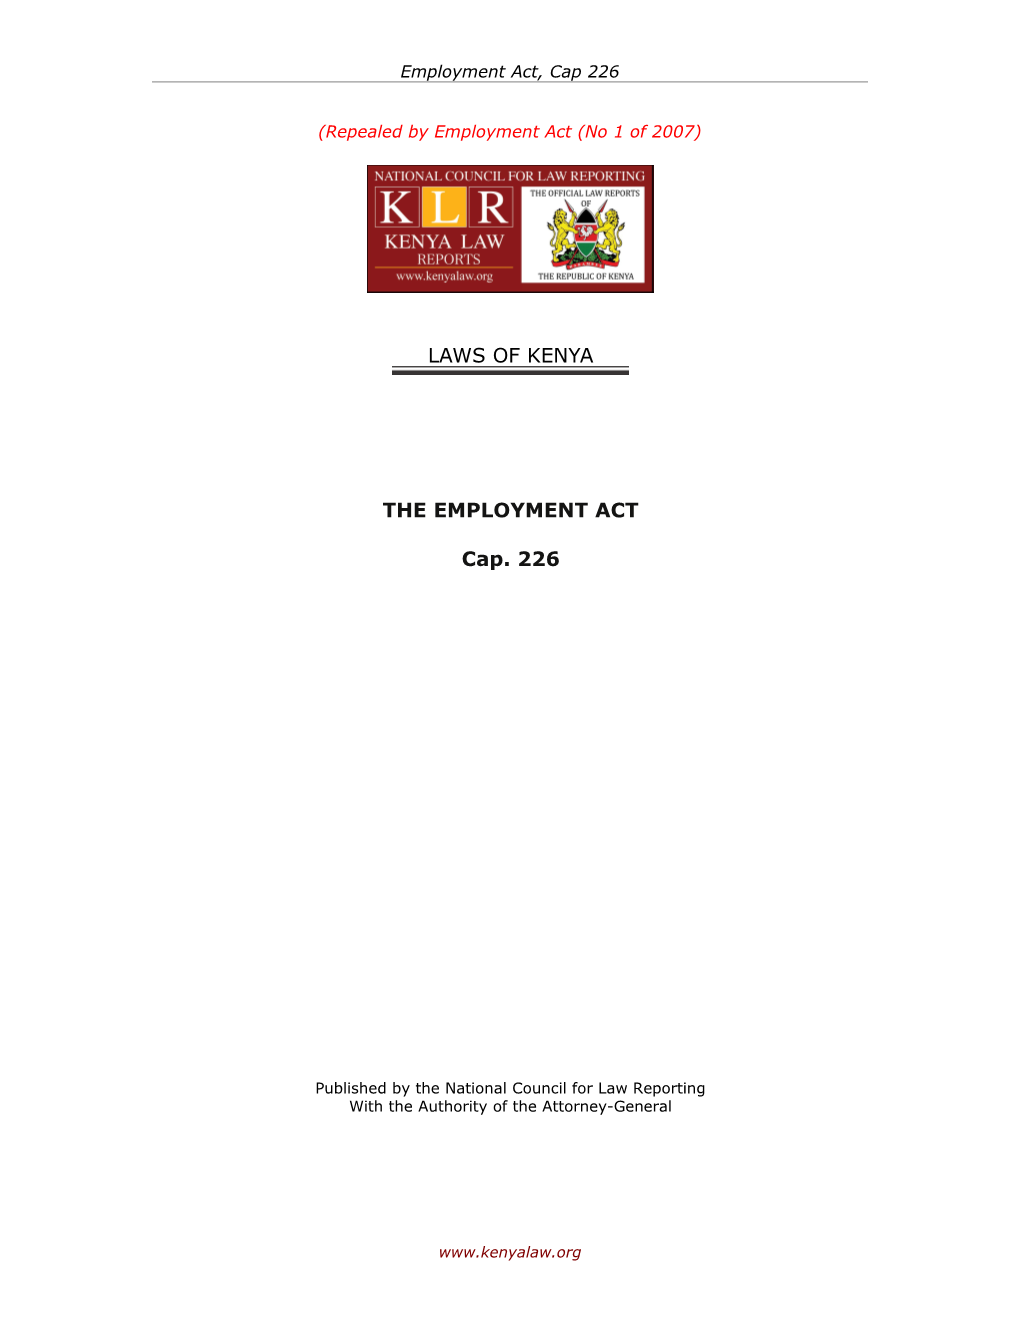 CHAPTER 226 - Employment (Repealed) Act